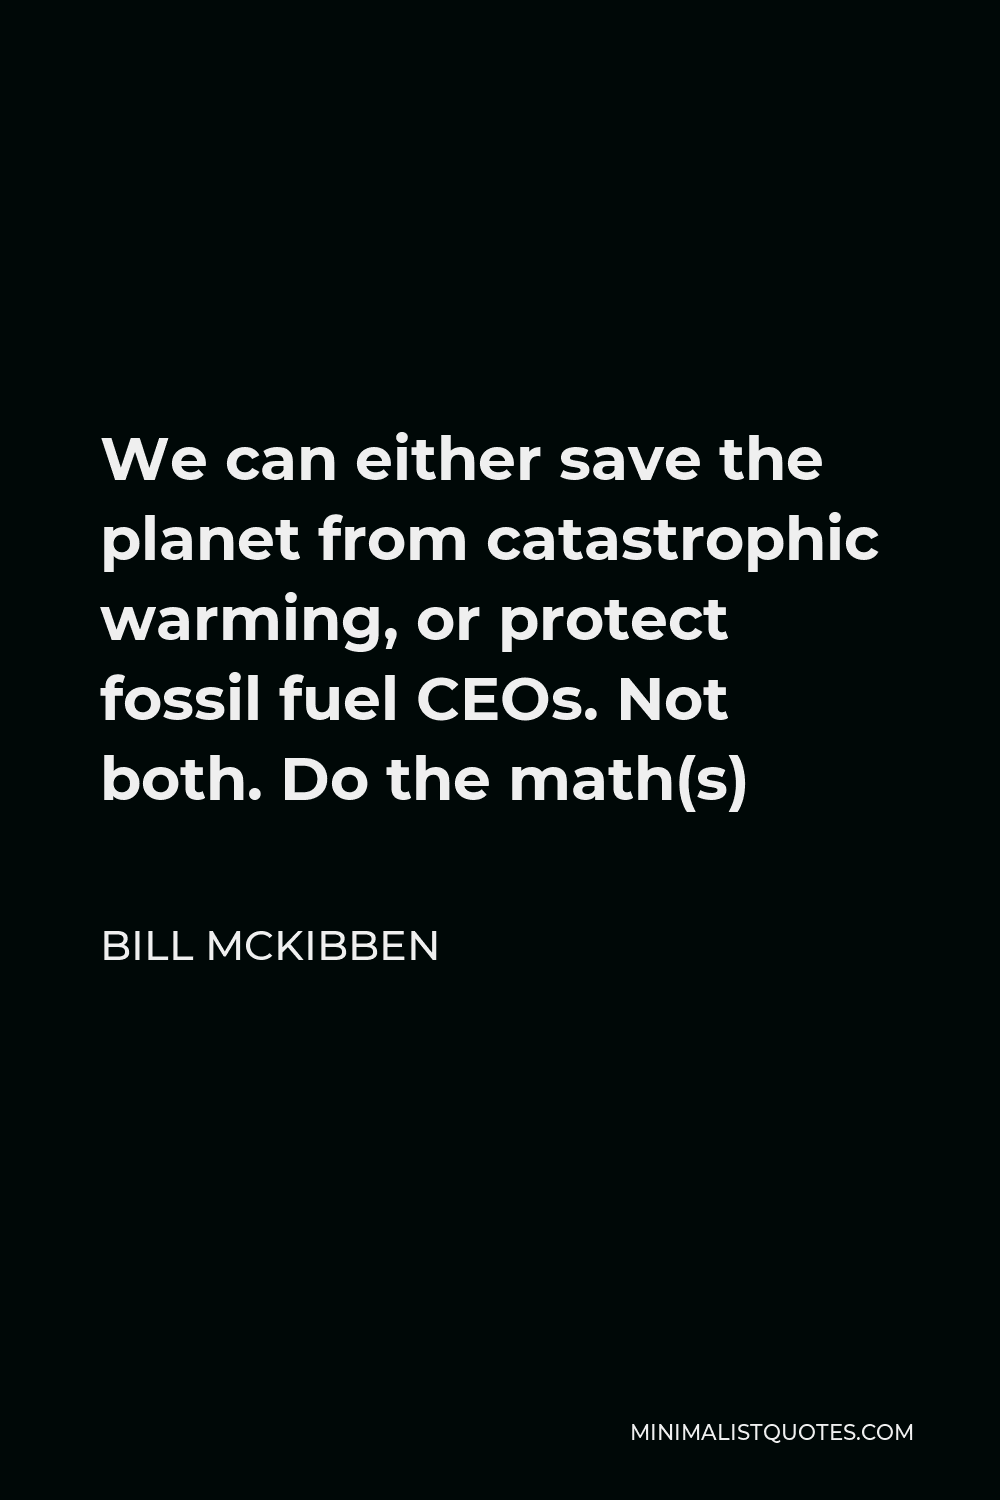 Bill McKibben Quote - We can either save the planet from catastrophic warming, or protect fossil fuel CEOs. Not both. Do the math(s)